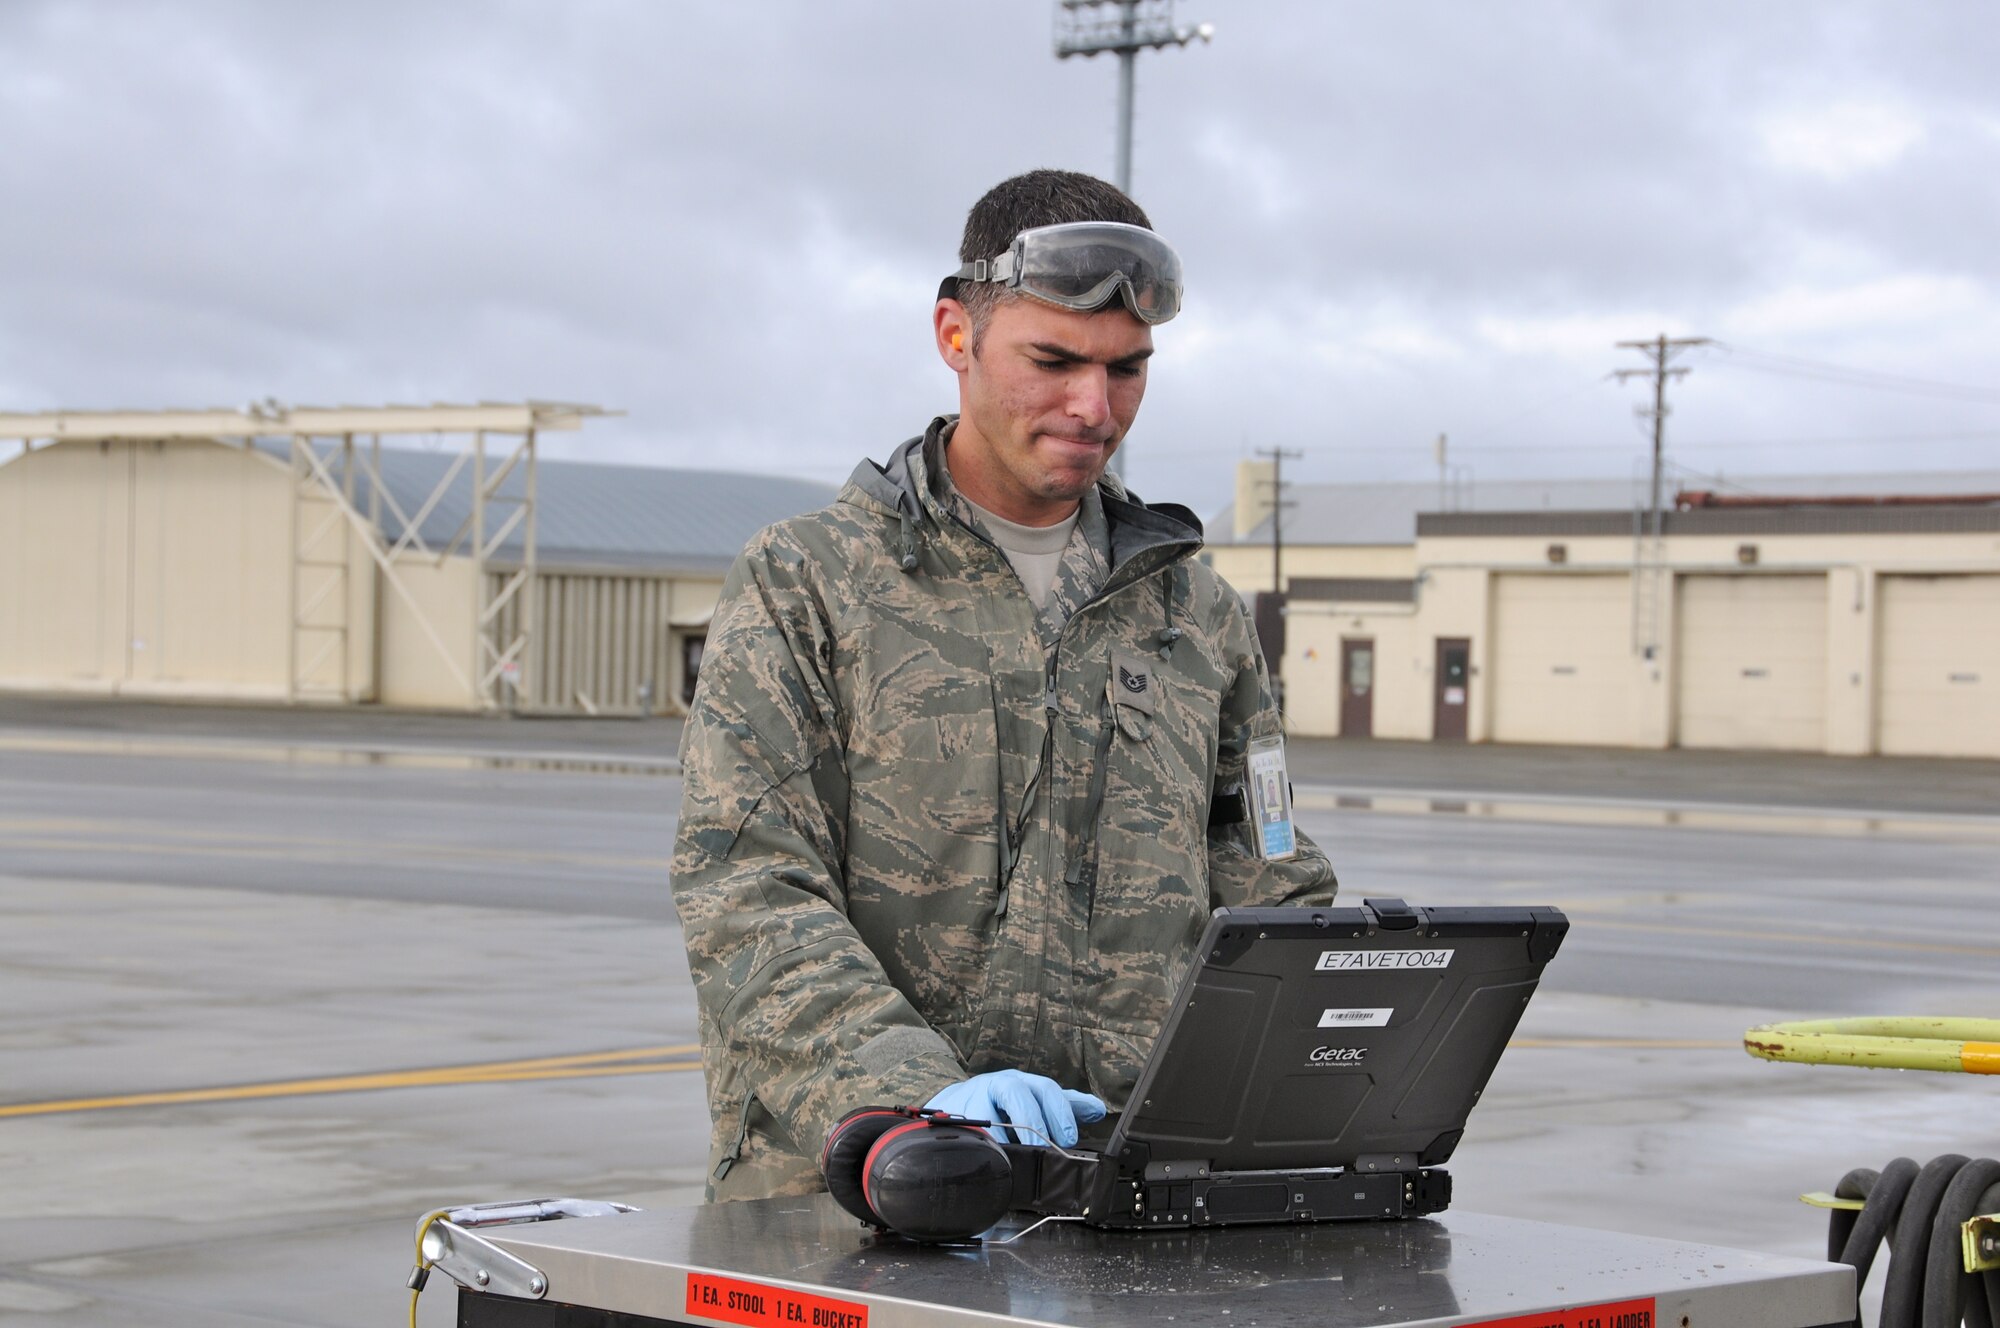 Tech. Sgt. David Pittari, reviews technical orders while waiting for the F-15s to return from a training mission while deployed to Joint Base Elmendorf-Richardson, Alaska in support of a training exercise. (U.S. Air Force Photo by: Technical Sergeant, Anthony M. Mutti)